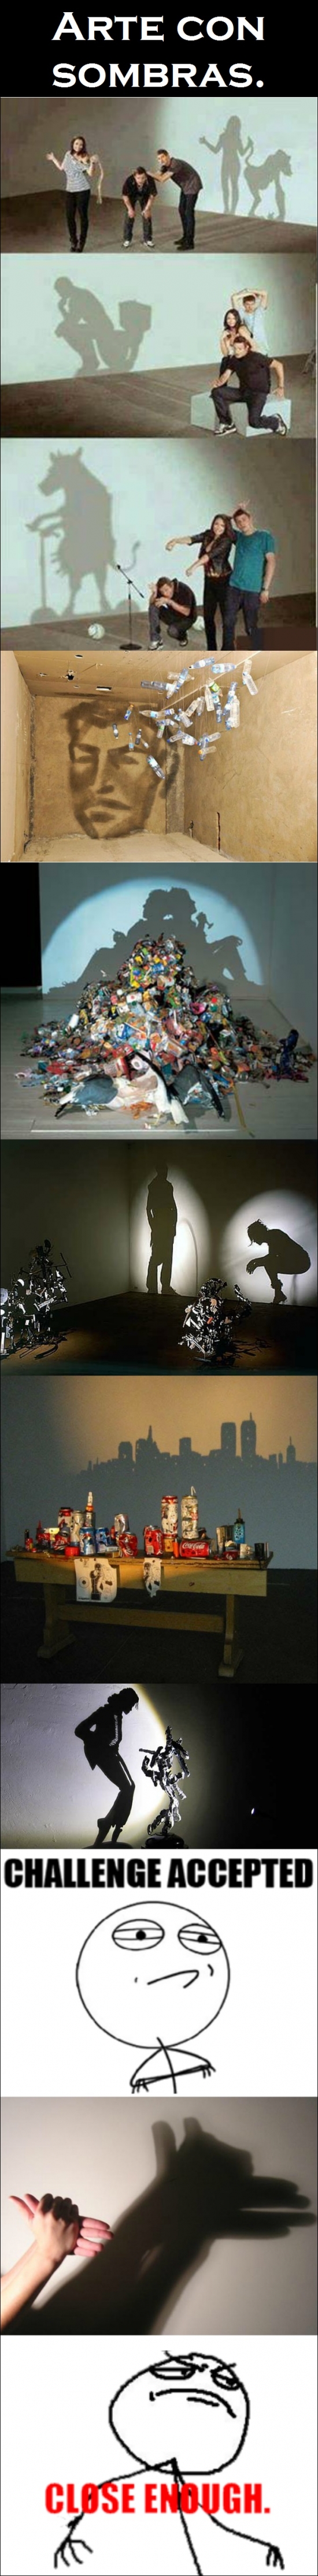 Challenge_accepted - Arte con sombras